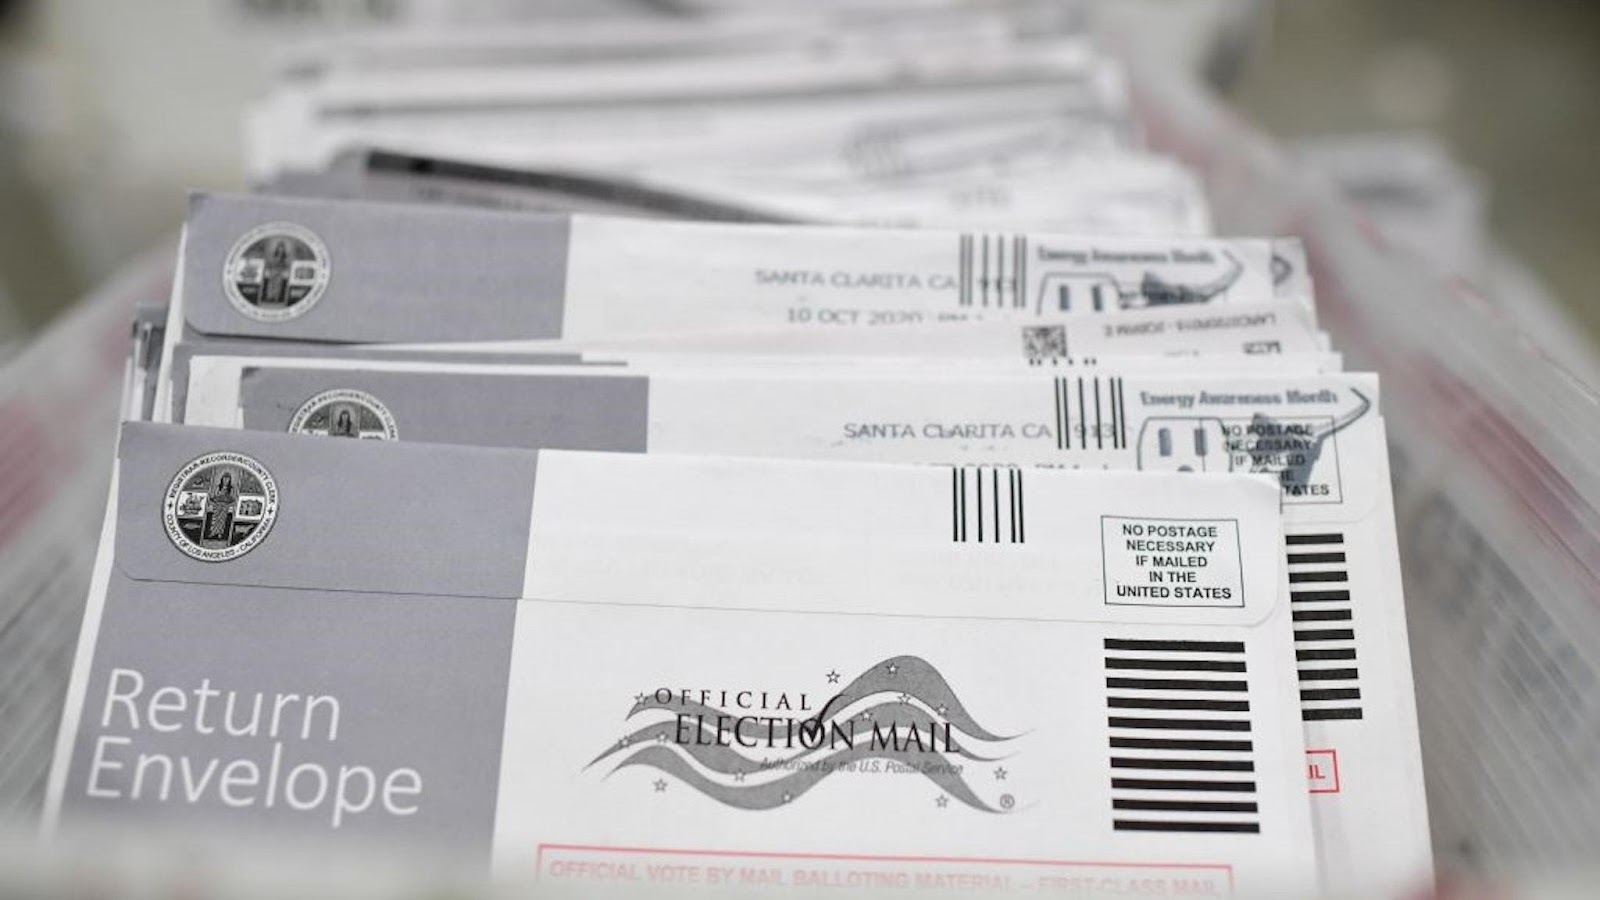 Mail-in ballots in their envelopes await processing at the Los Angeles County Registrar Recorders' mail-in ballot processing center at the Pomona Fairplex in Pomona, California, October 28, 2020.